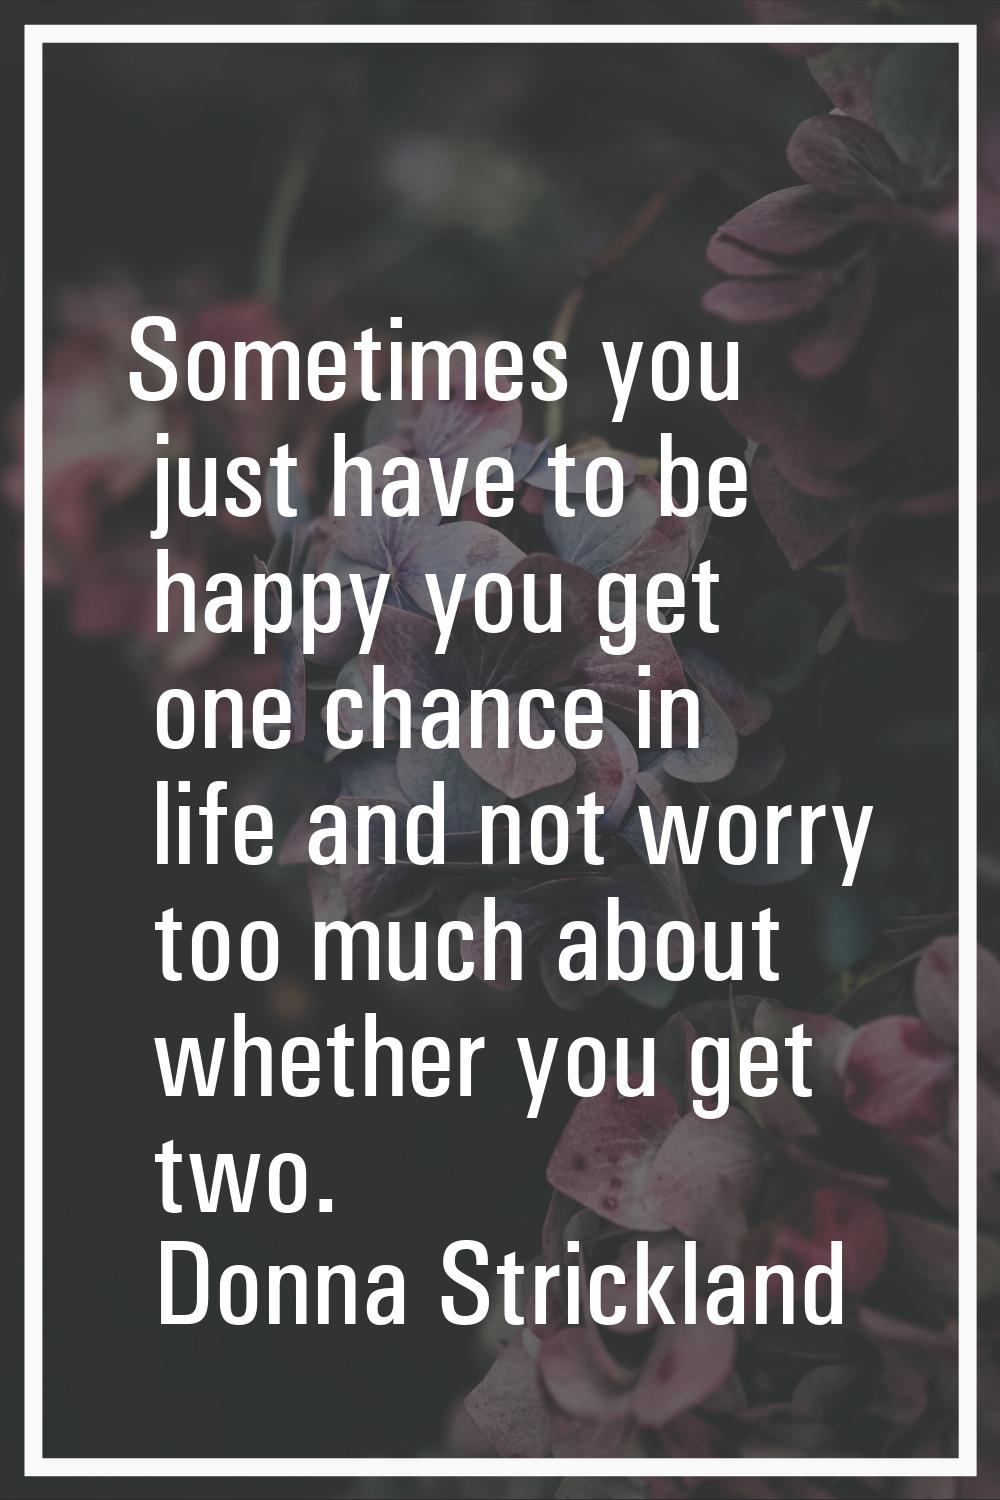 Sometimes you just have to be happy you get one chance in life and not worry too much about whether